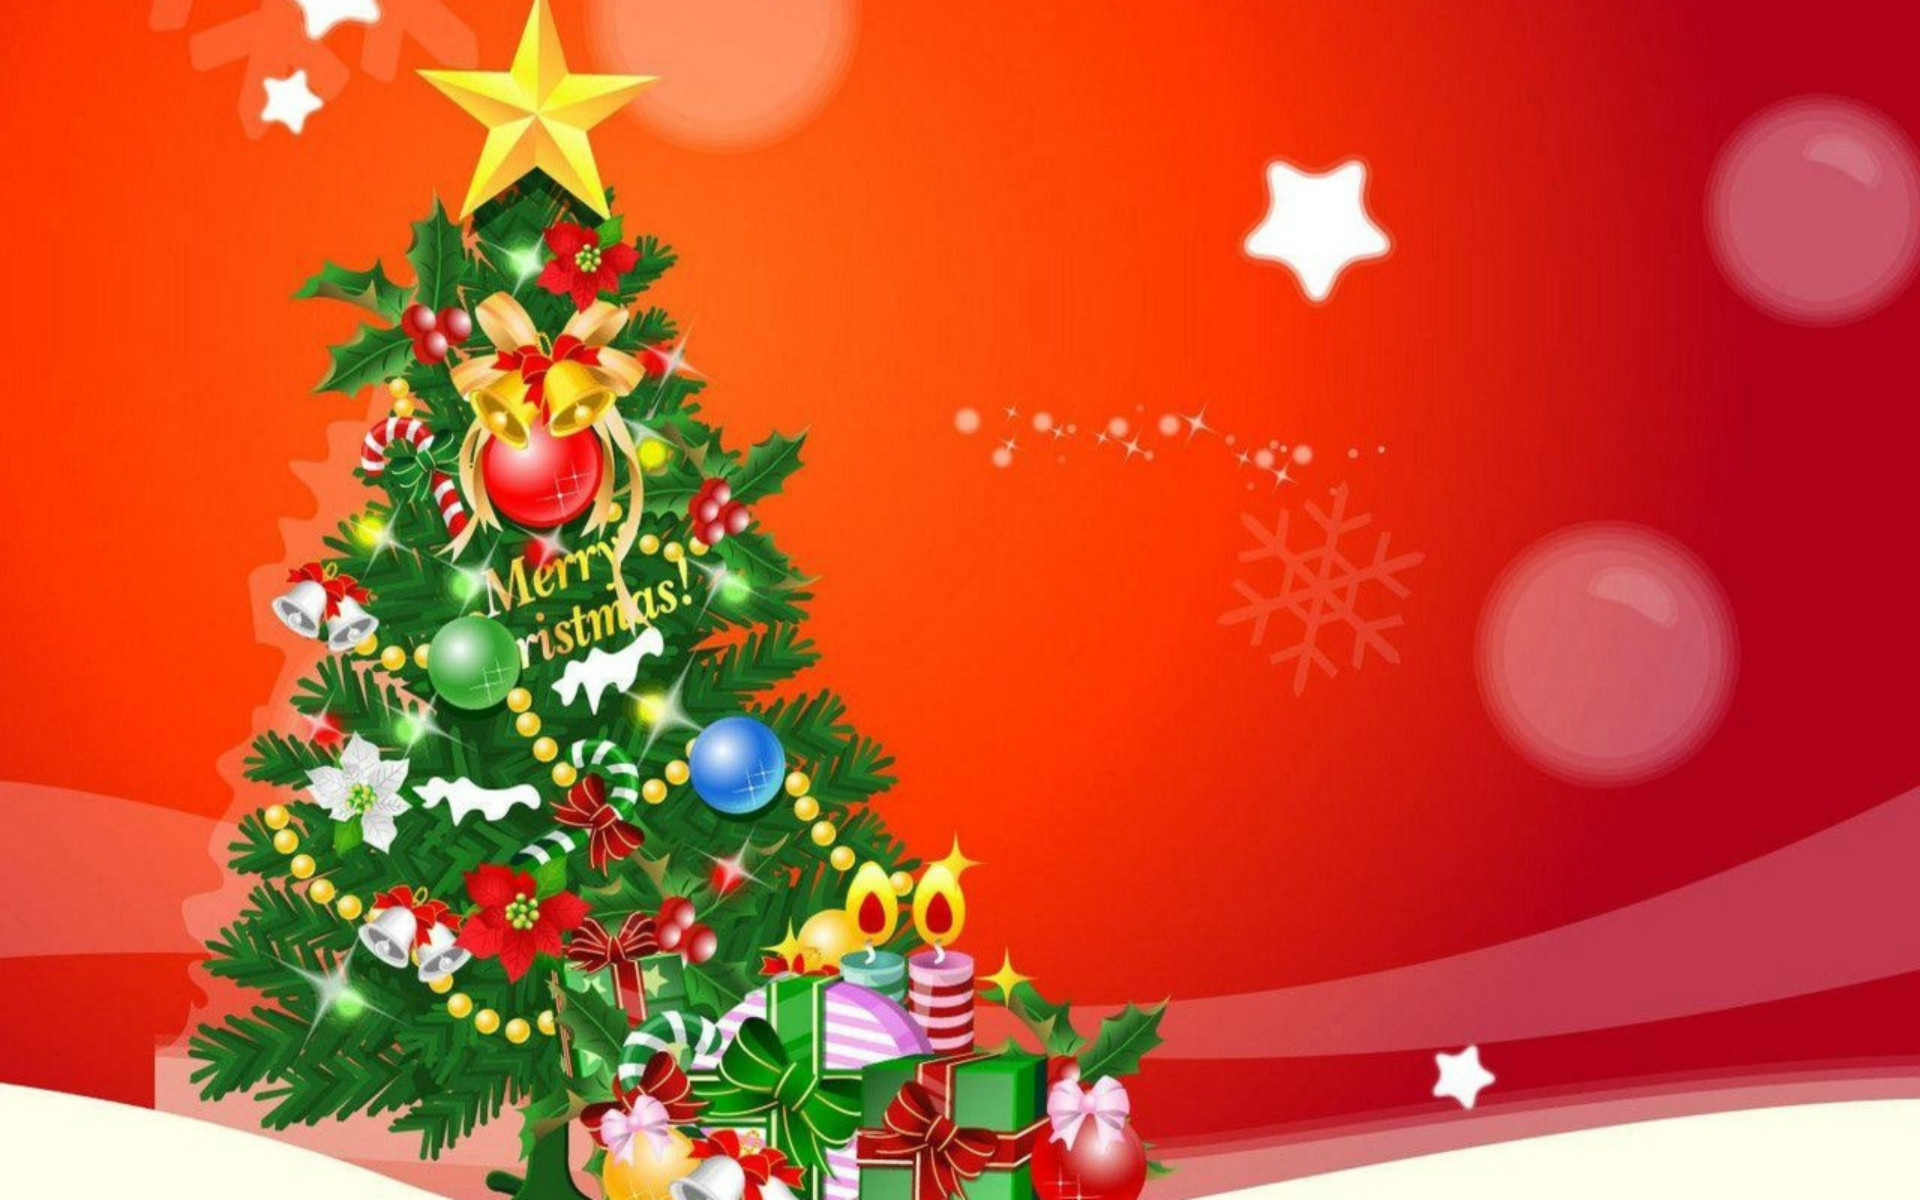 free-download-wallpaper-holiday-merry-christmas-background-hd-351457-hd-1920x1200-for-your